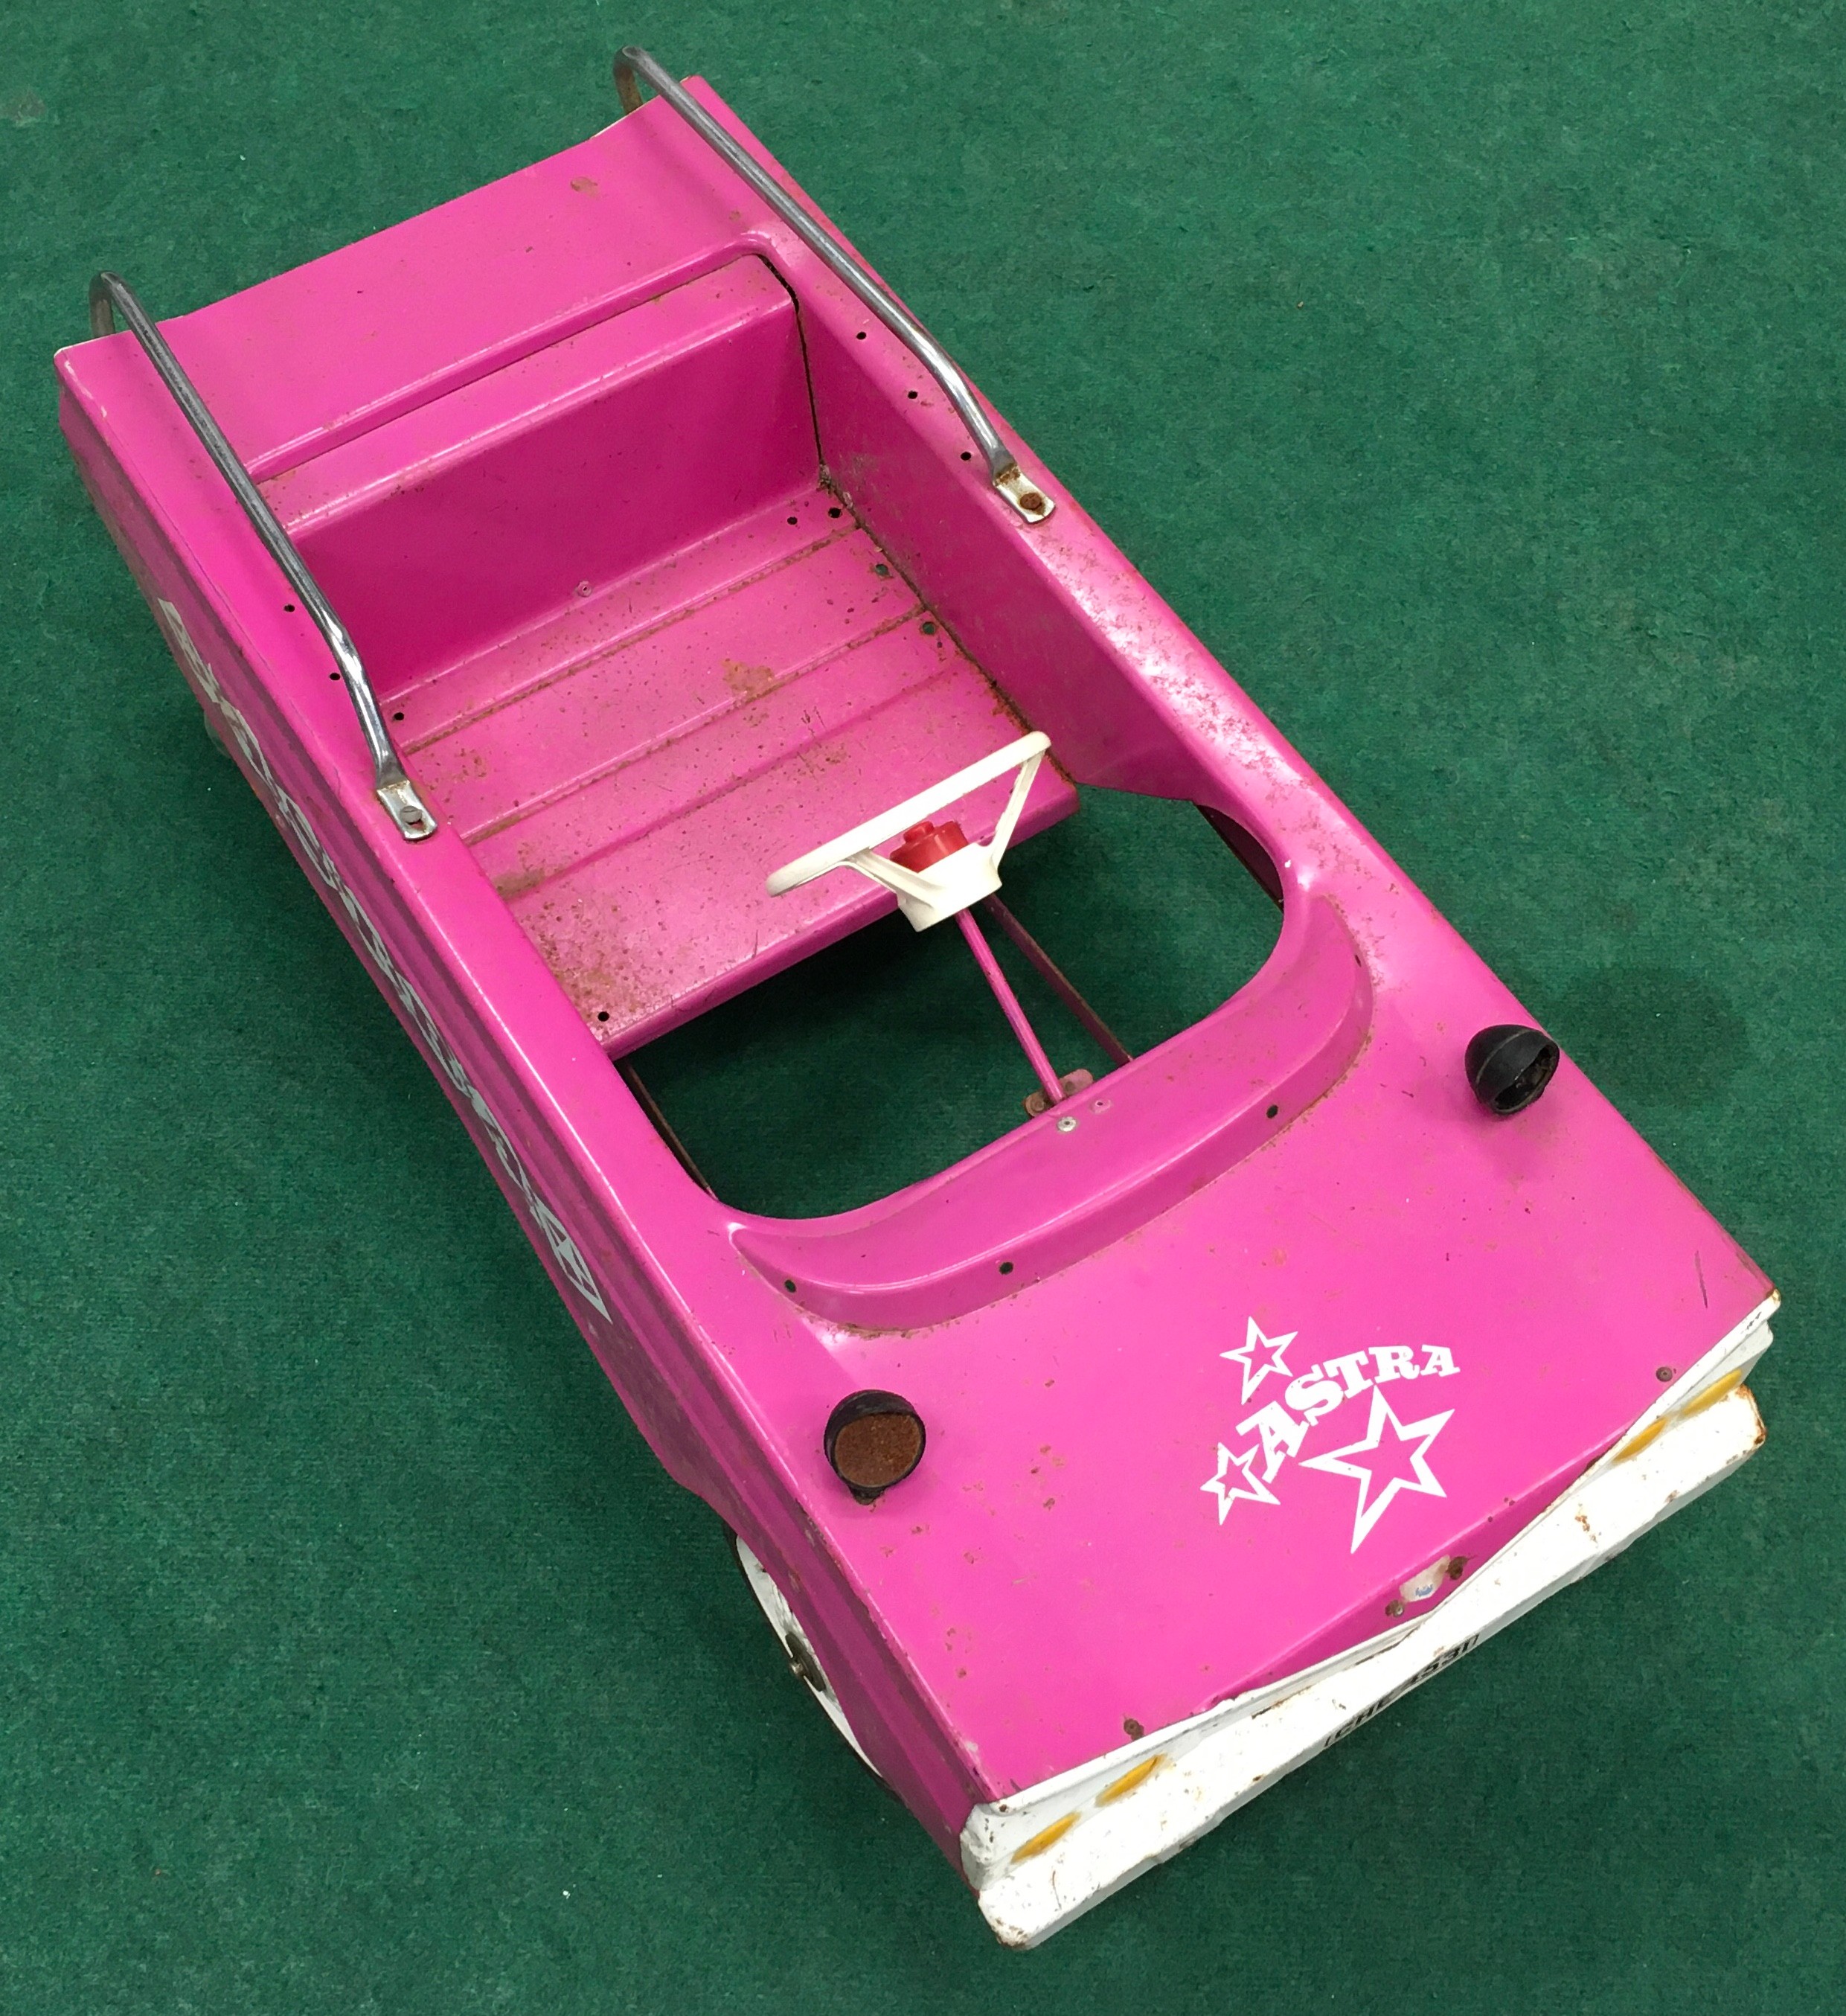 Triang 1960s vintage "Astra" pink pedal car 102x45x40cm. - Image 2 of 5